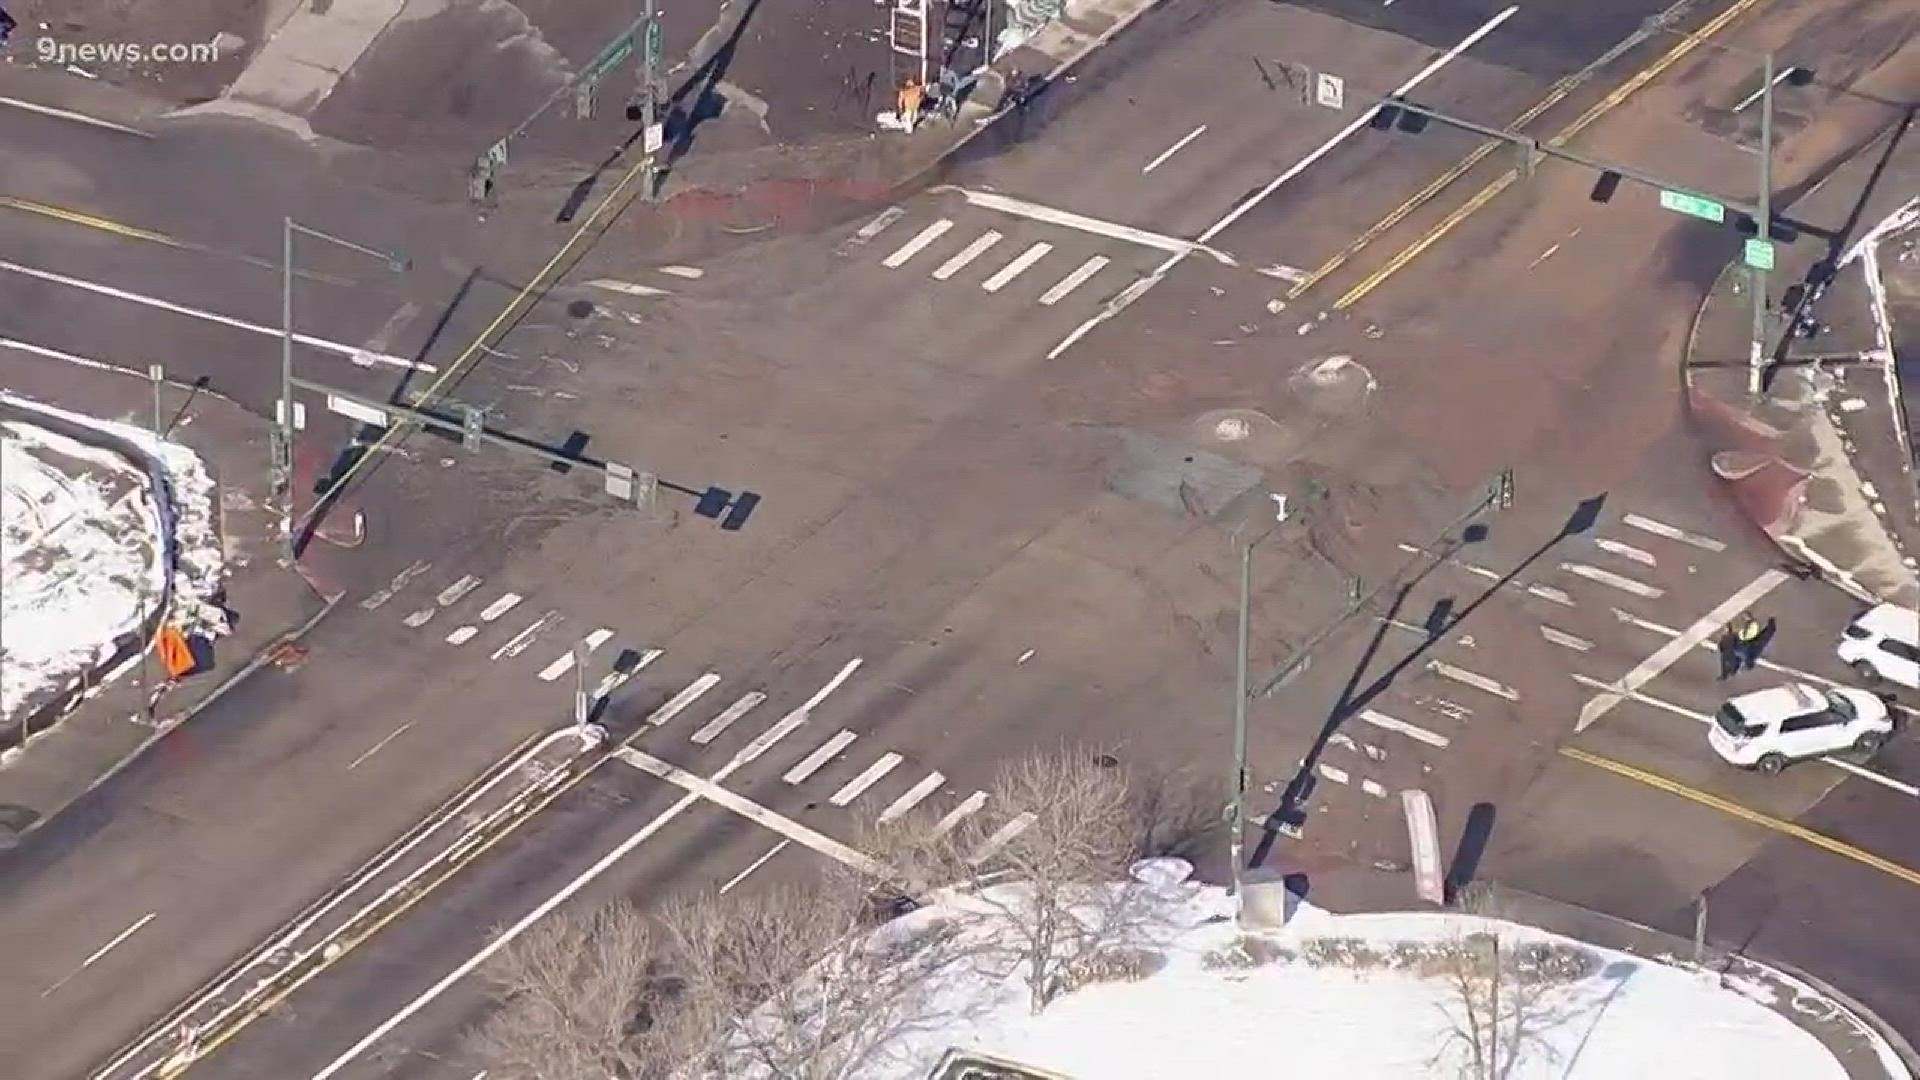 A water main break has forced the closure of the intersection of 47th and Washington in Denver.